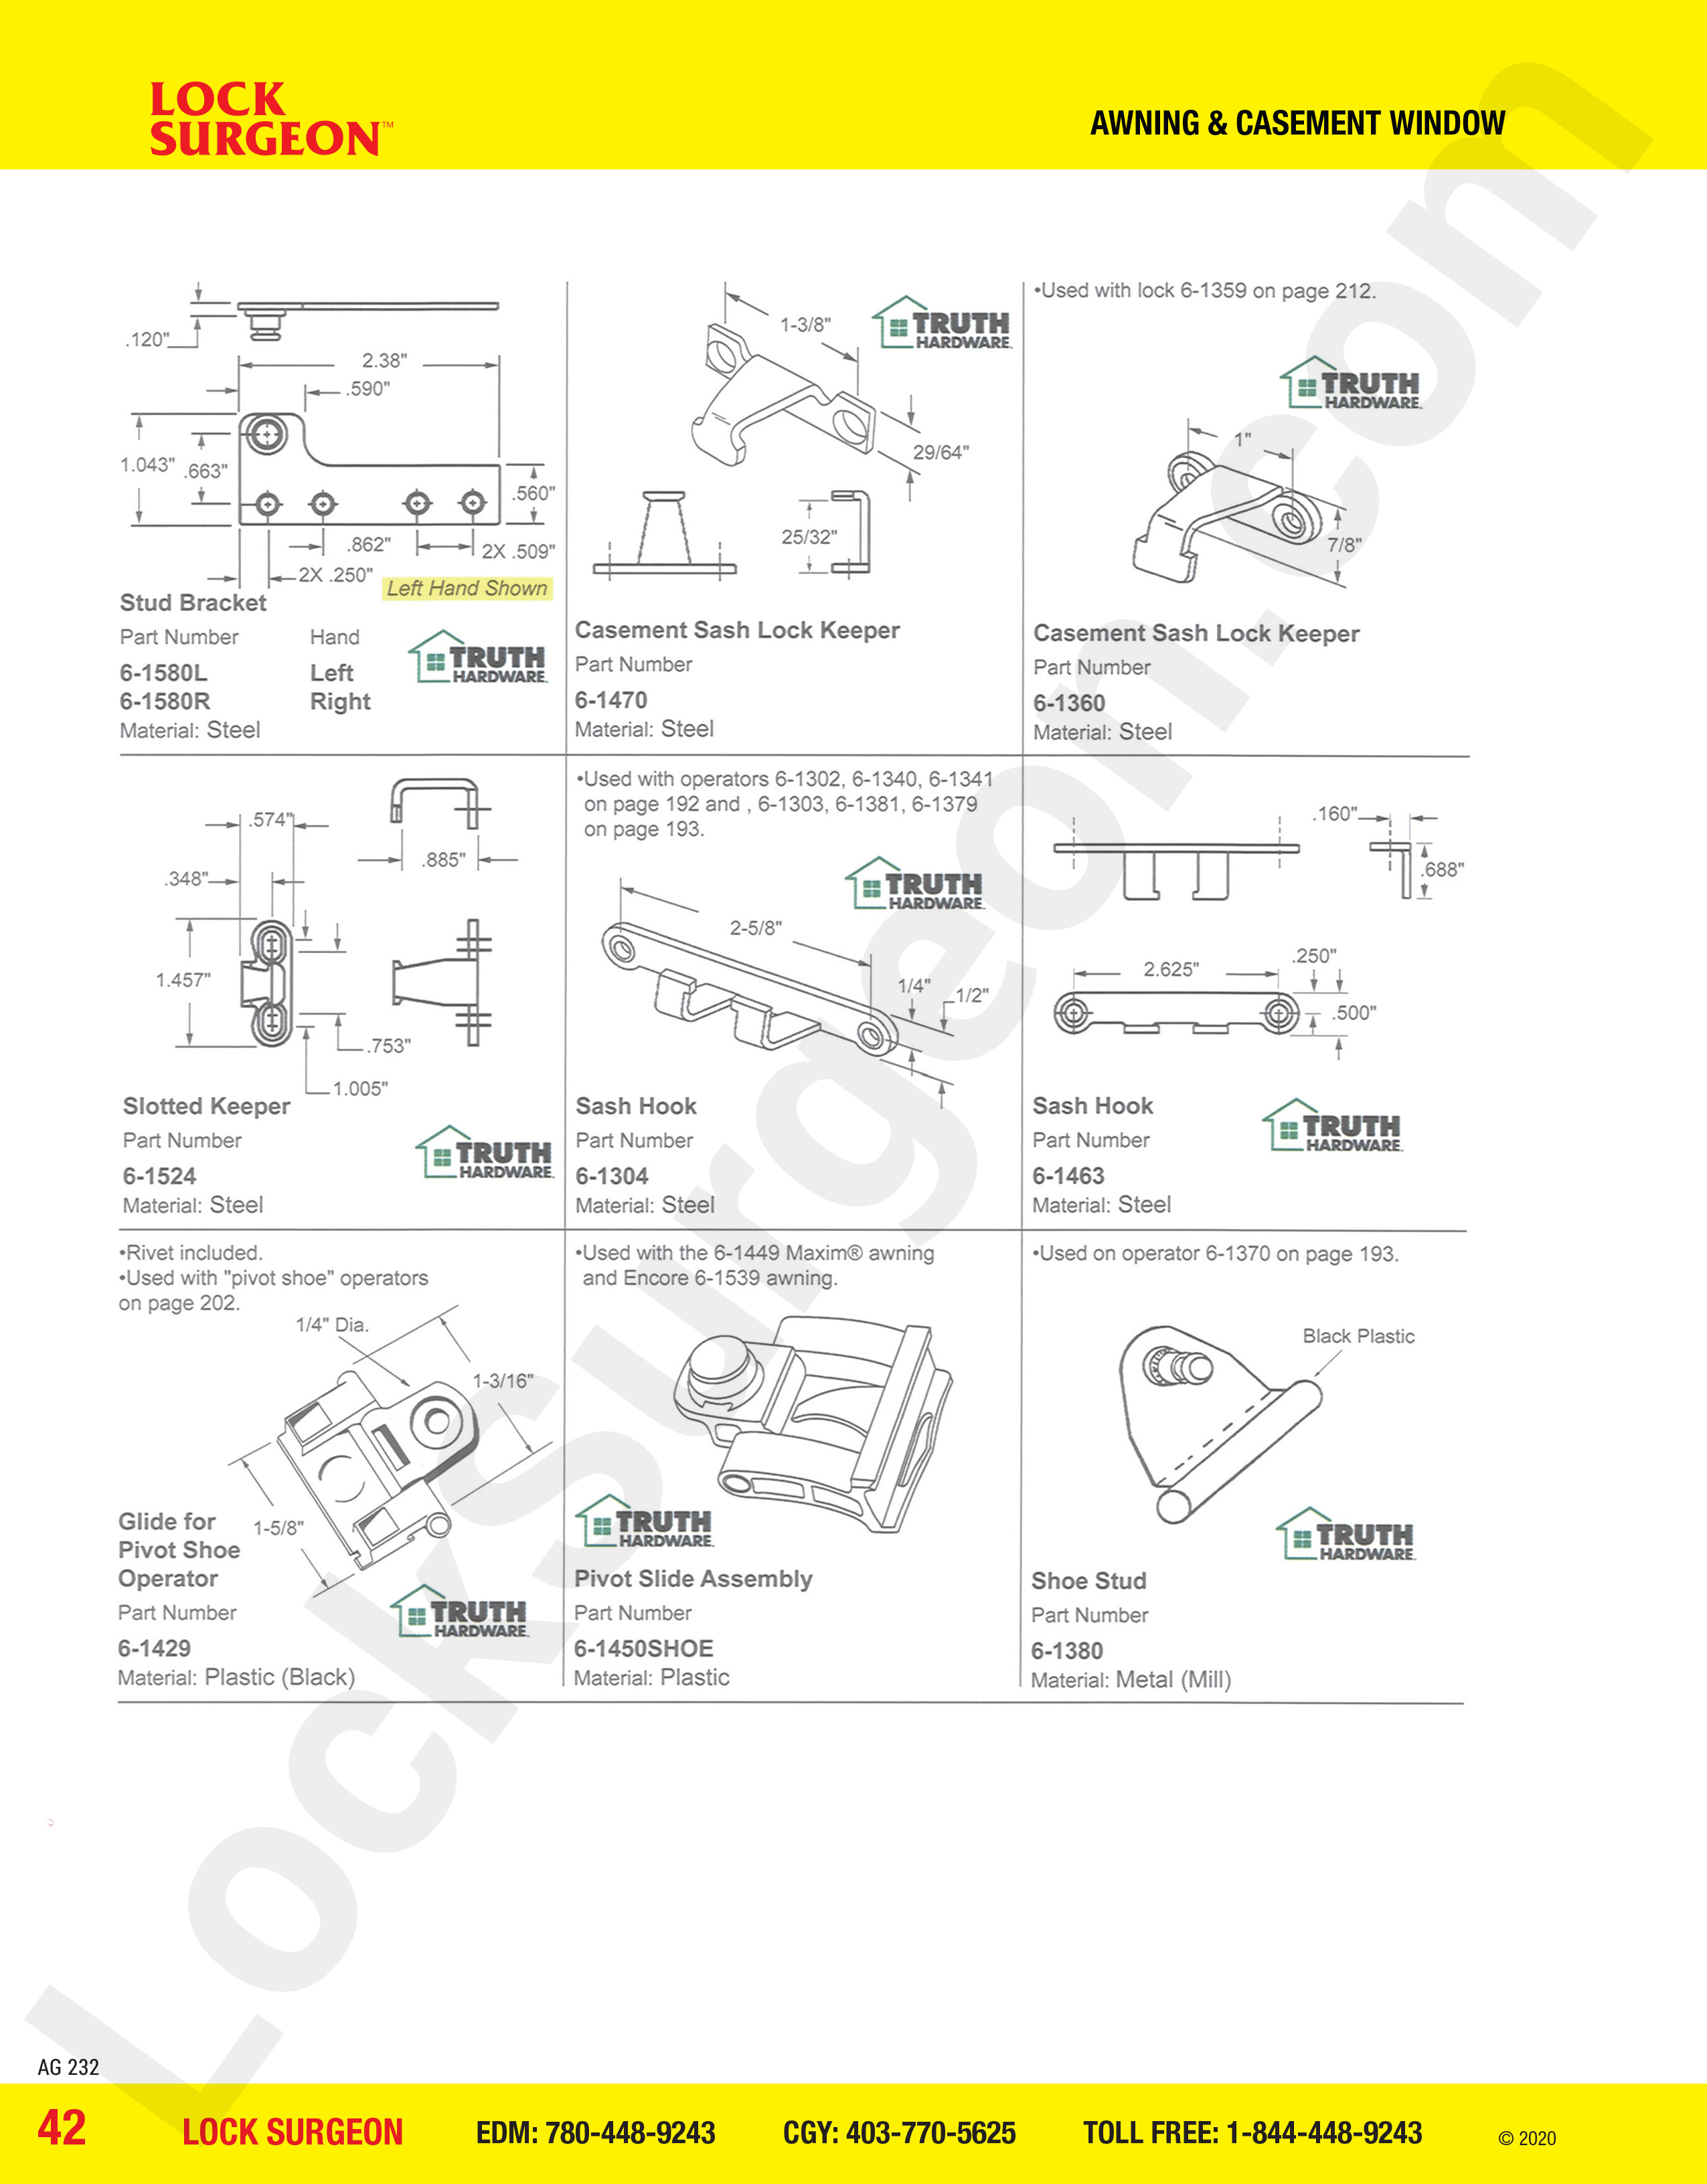 Casement window parts for Truth Hardware keepers, casement sash lock keeper, slotted keeper.